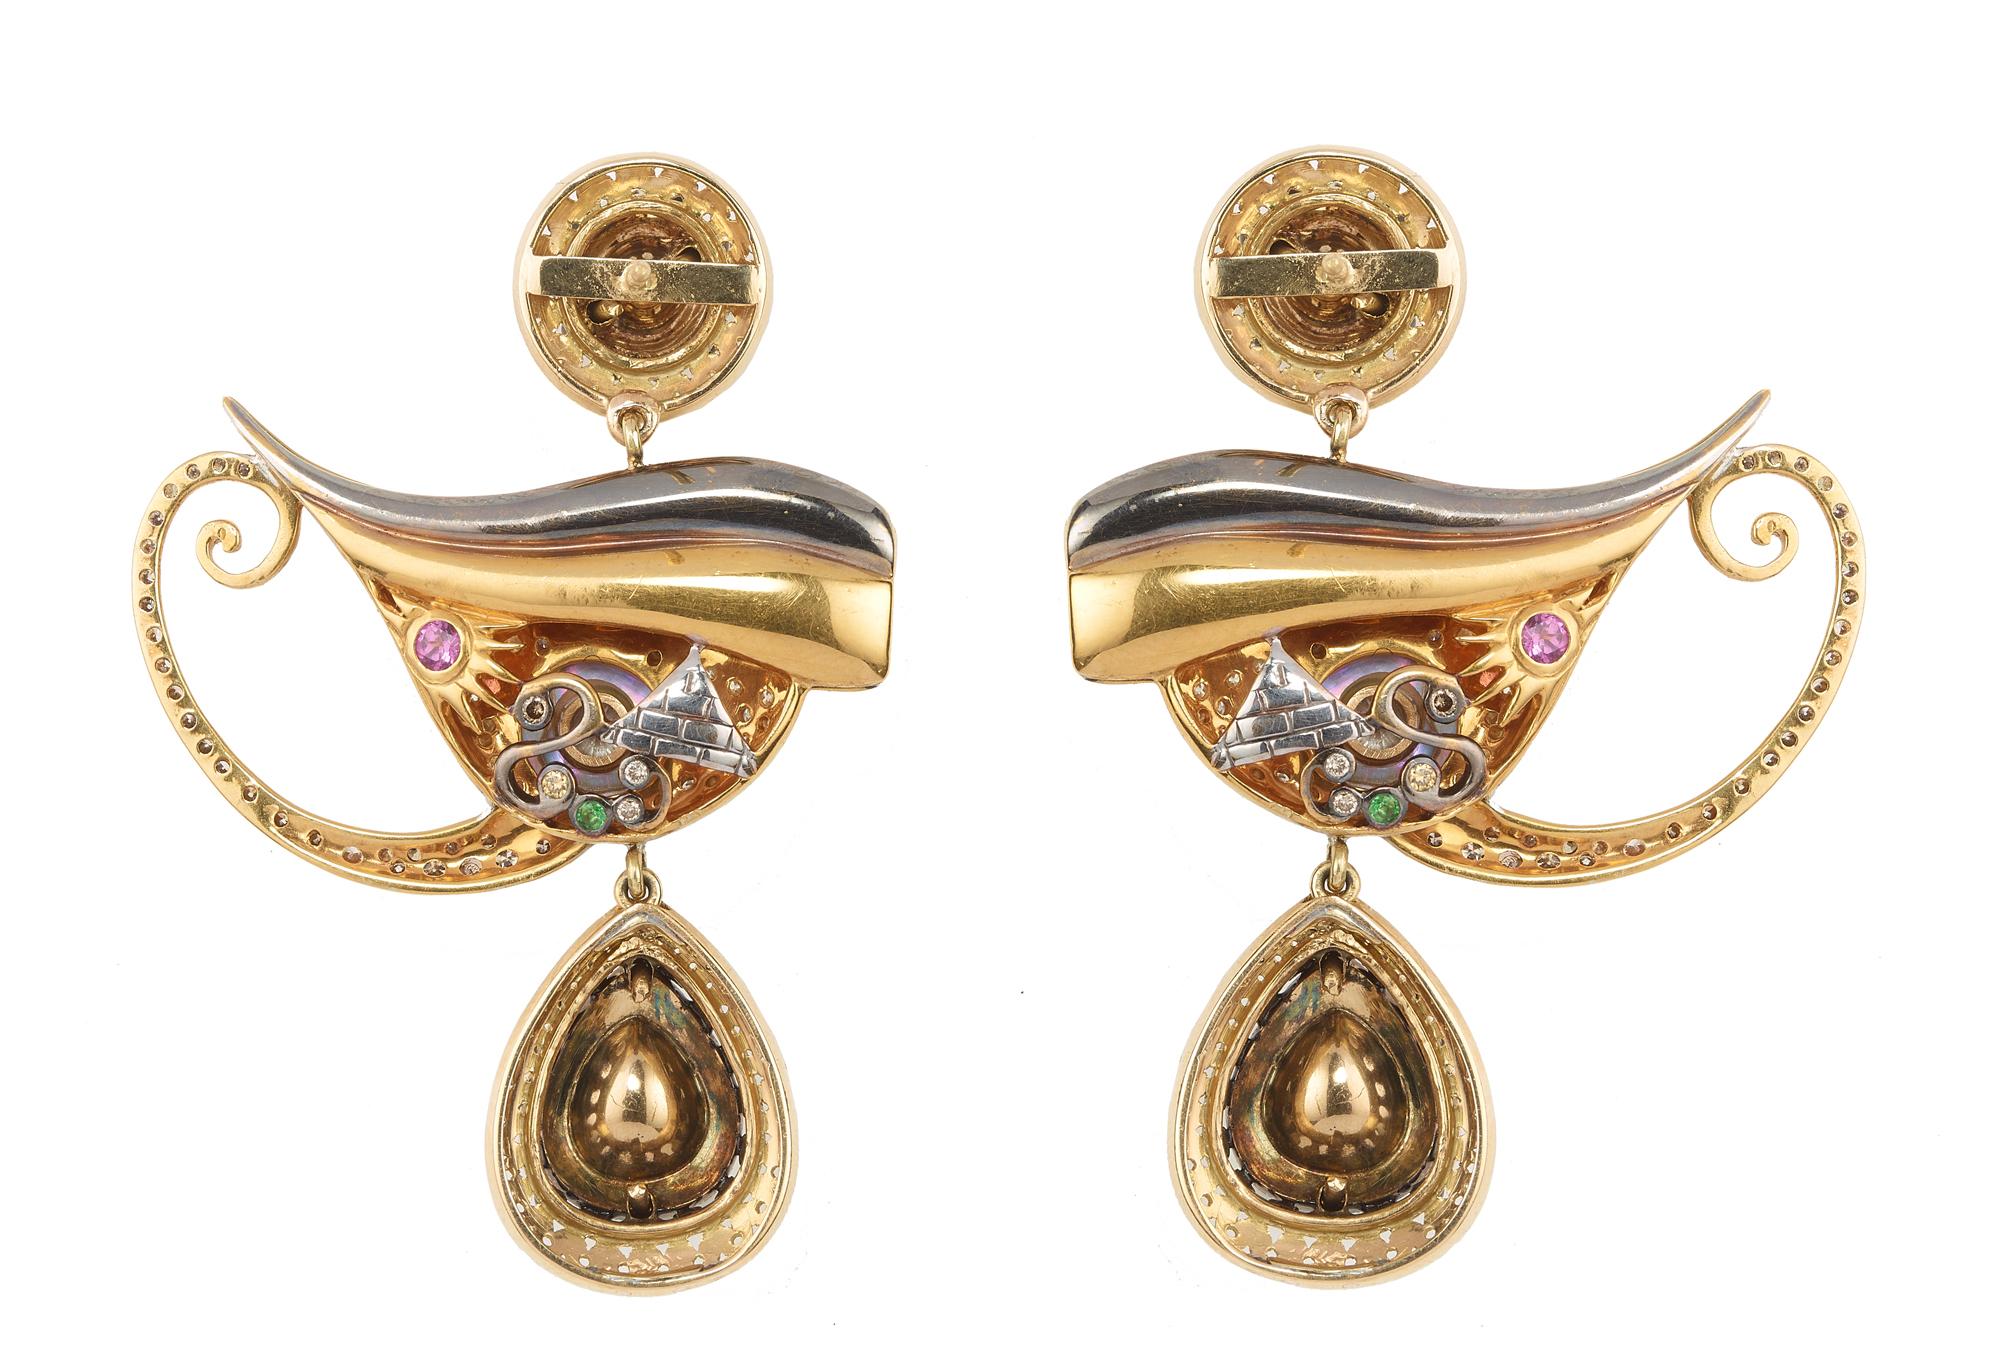 One of a kind pair of eye shape earrings in yellow 750/1000 gold (18K) vermeil and black enamel by Sylvie Corbelin. For pierced ears.
The earrings are composed with XIX century elements.
The top of the earrings is for pierced ears and is set with